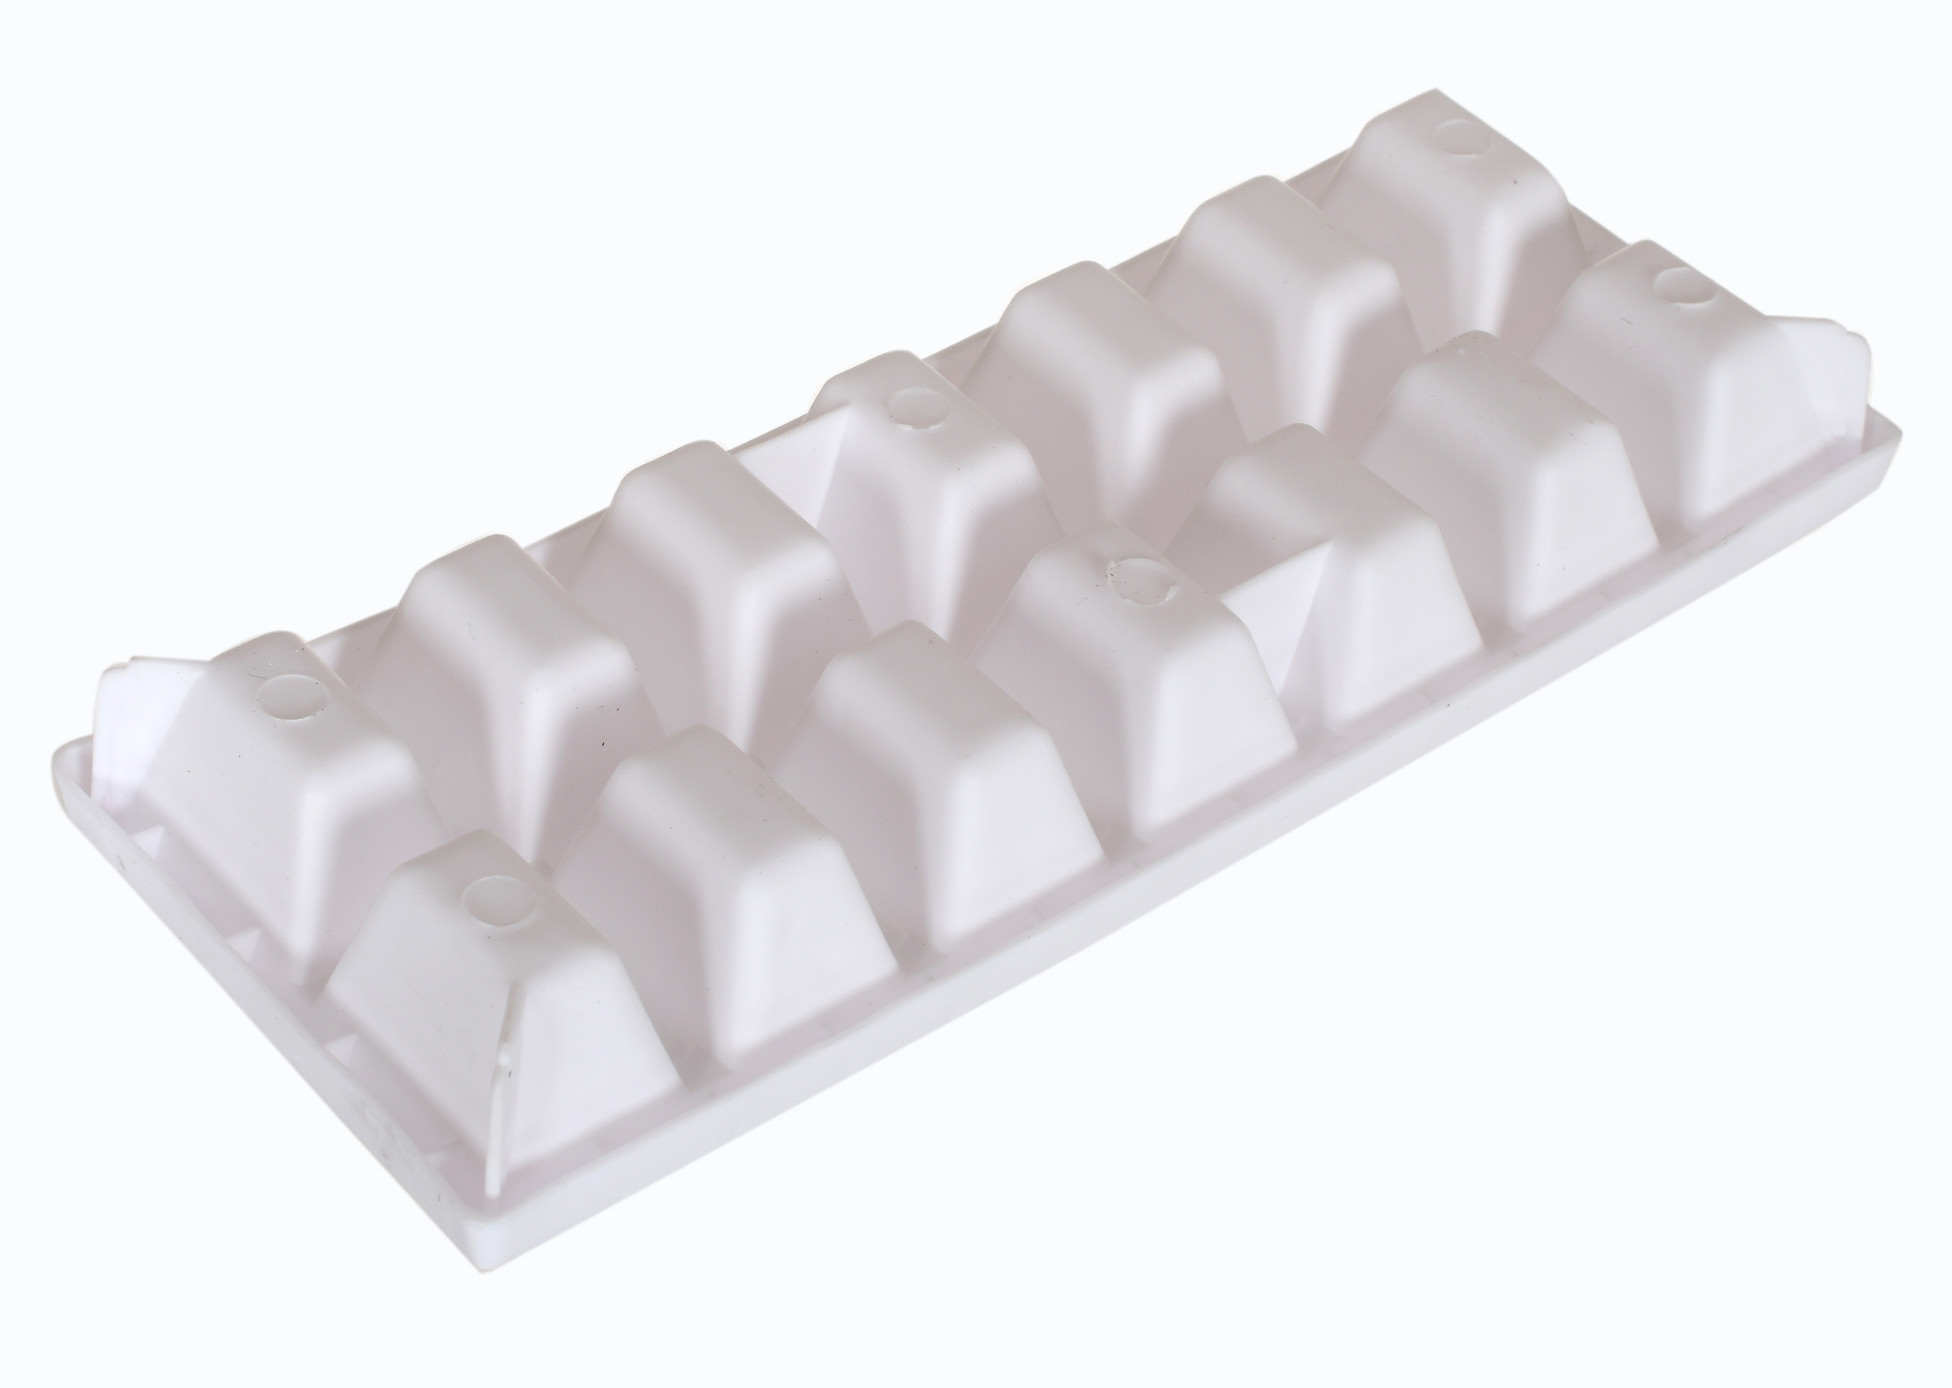 Kuber Industries Easy Release Ice Cube Tray Set - Durable Plastic Stackable Easy Twist 14 Cube Trays- Pack of 4 (Green & White)